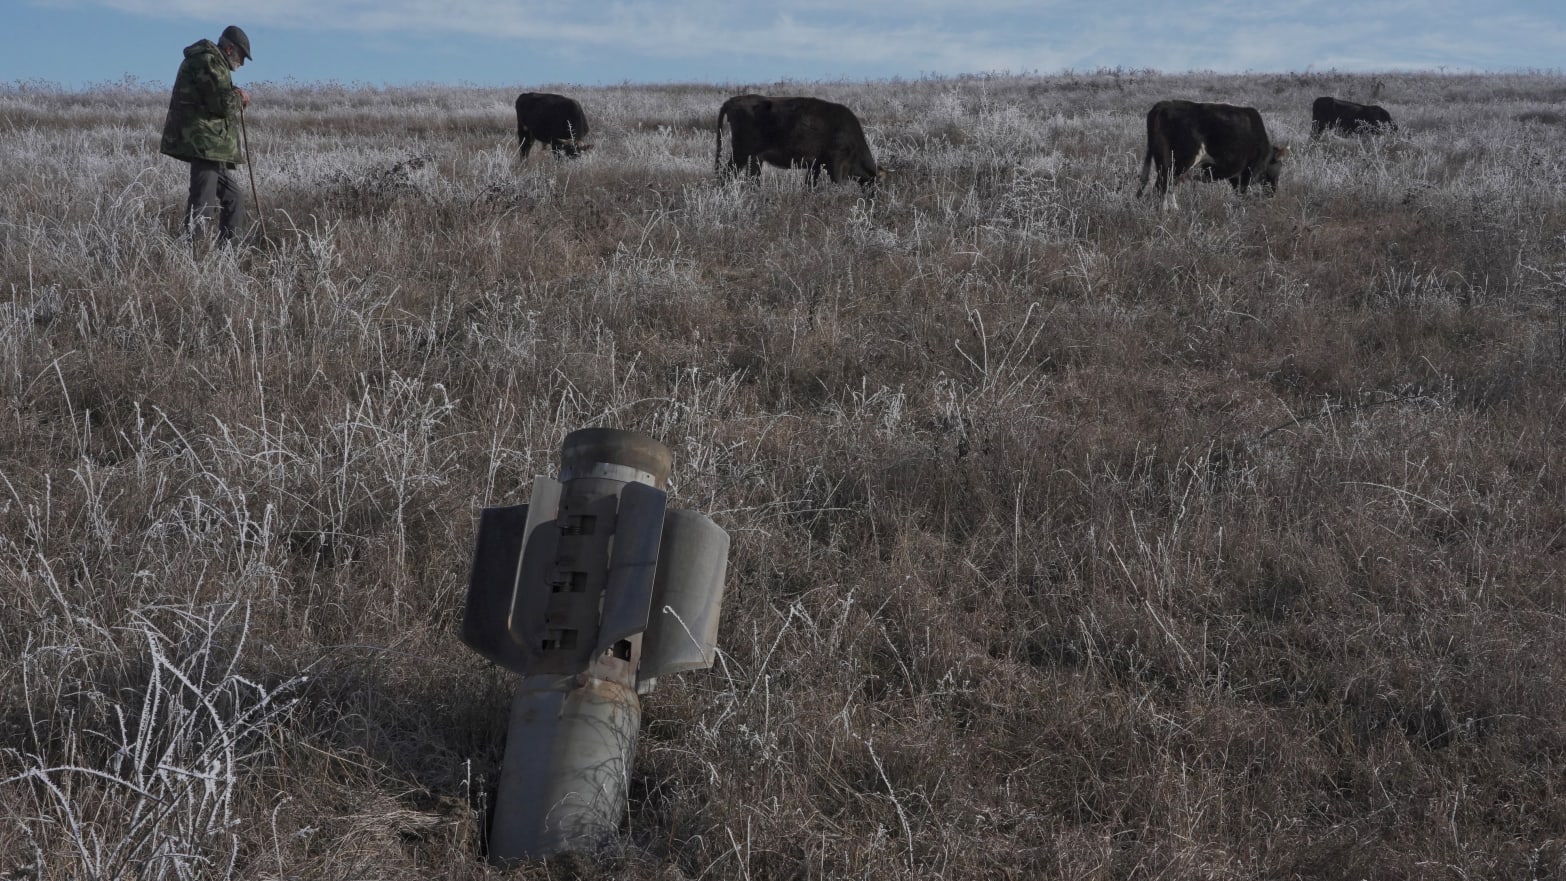 A man shepherds his cows near a rocket case left after a military conflict over Nagorno-Karabakh region, outside Stepanakert, Jan. 6, 2021. 